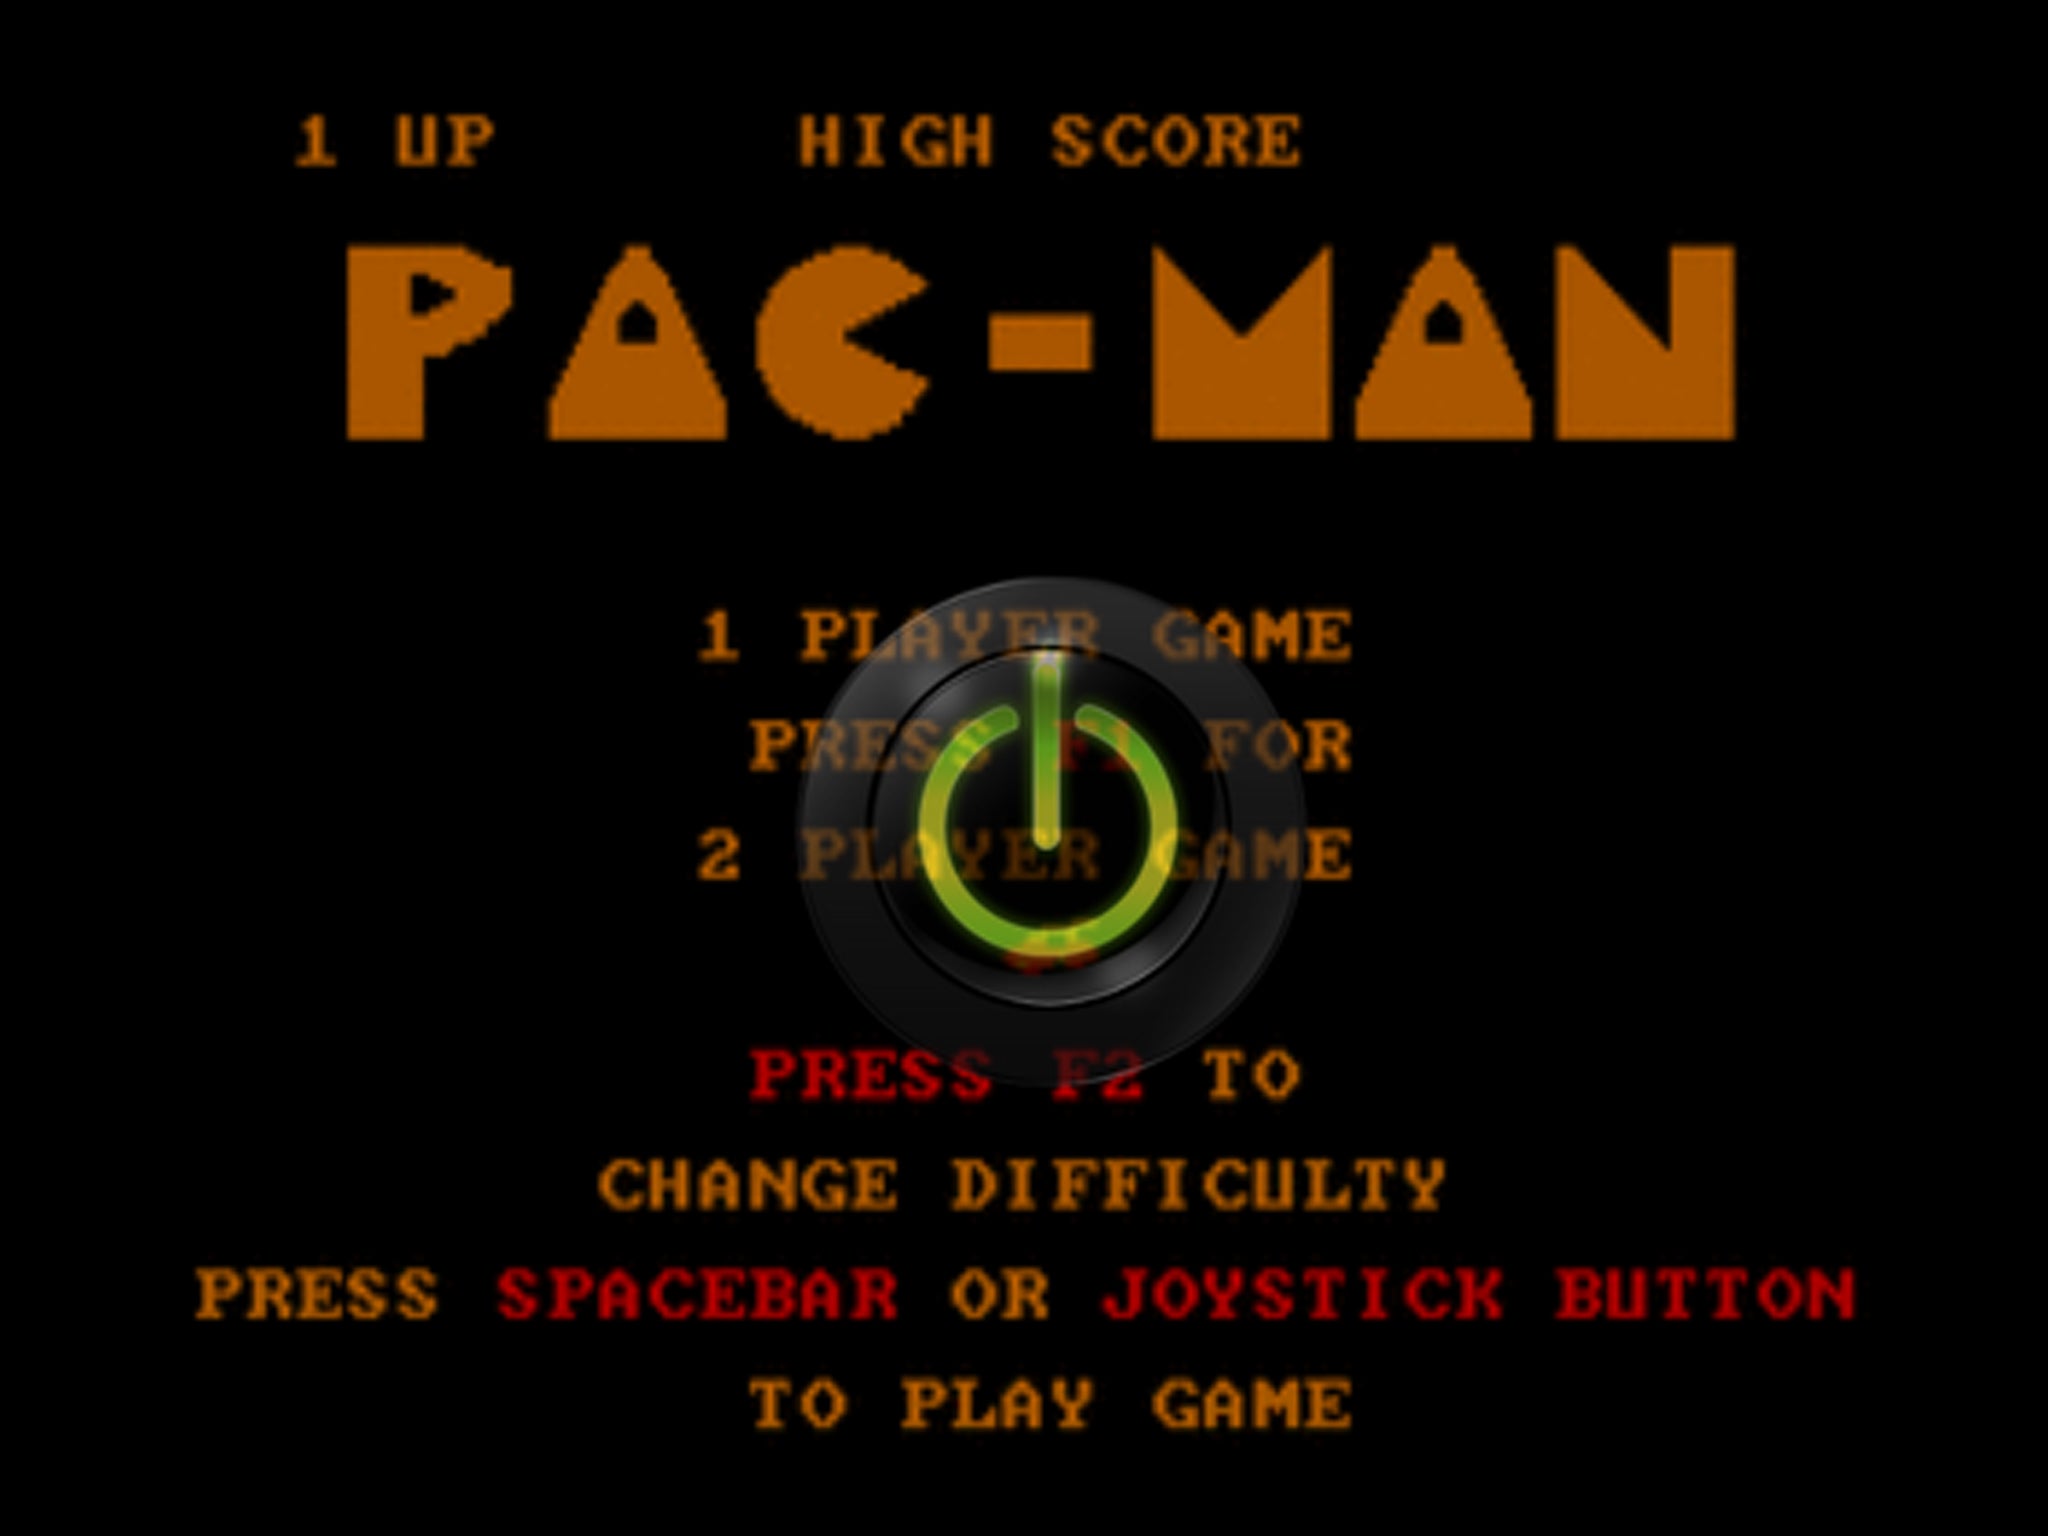 Pacman was just one of the games availably on the Internet Archive, and briefly on Twitter